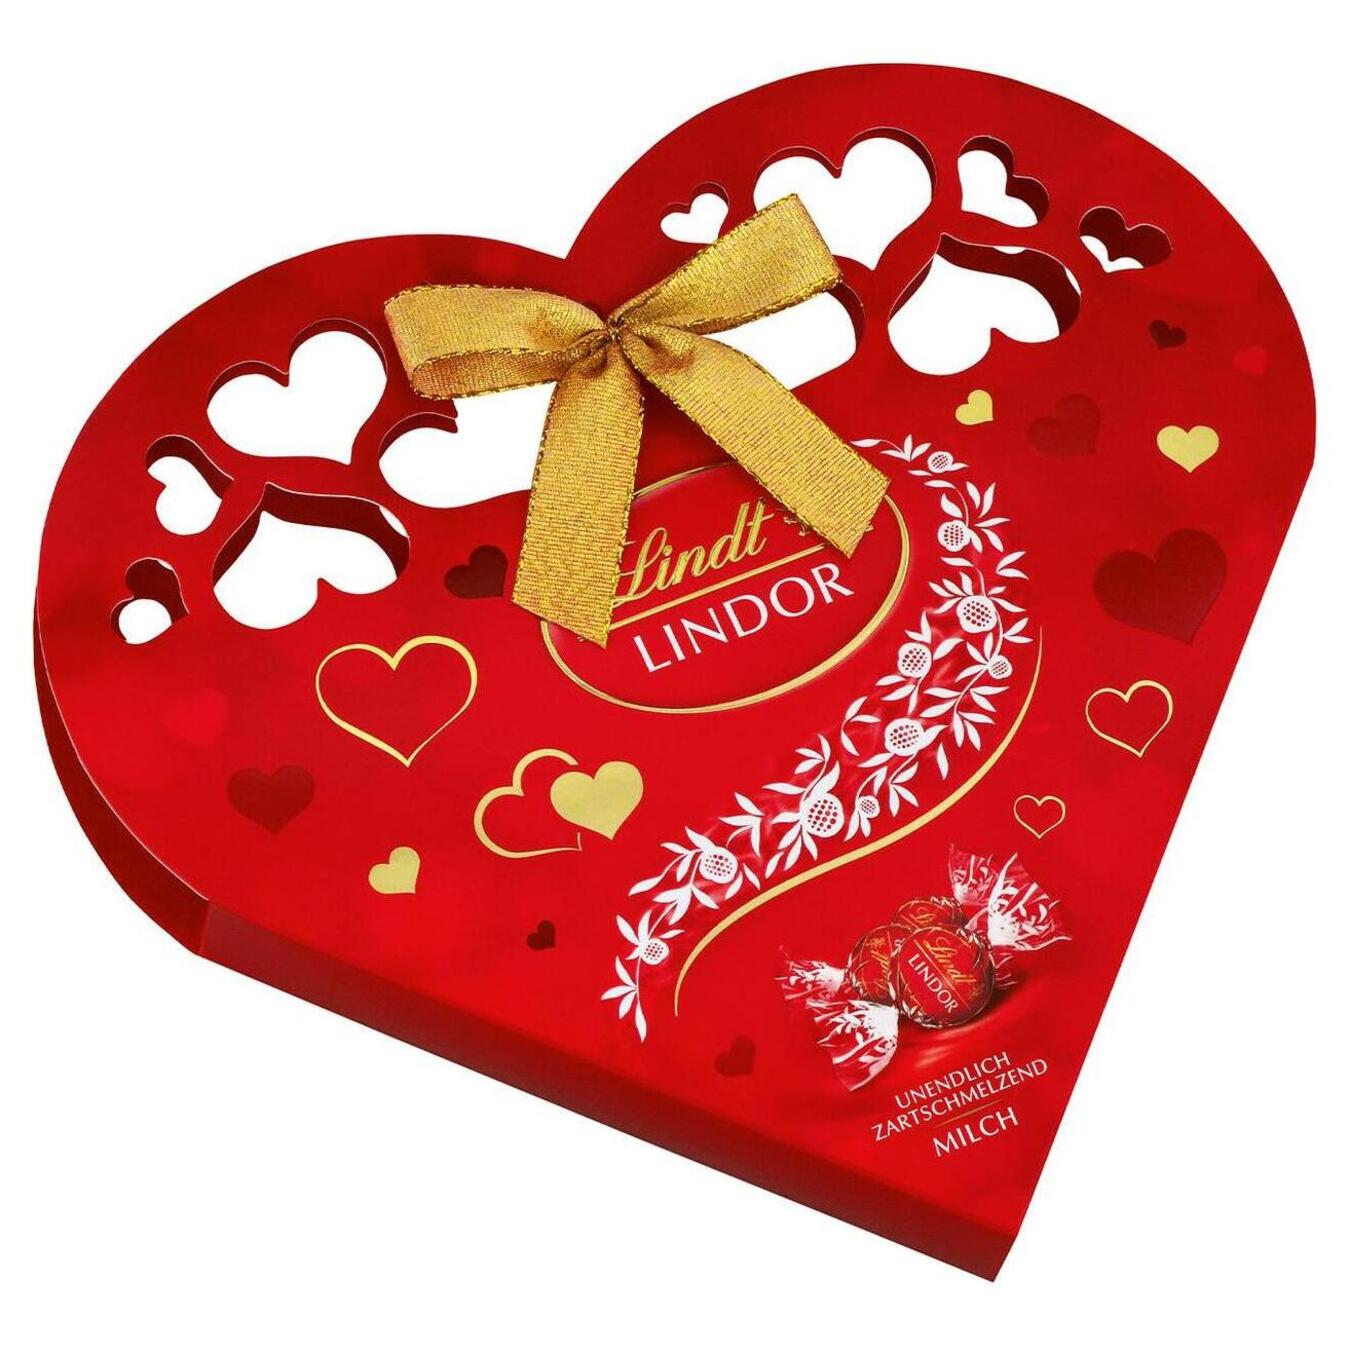 Lindt milk candies in a heart-shaped box 112g